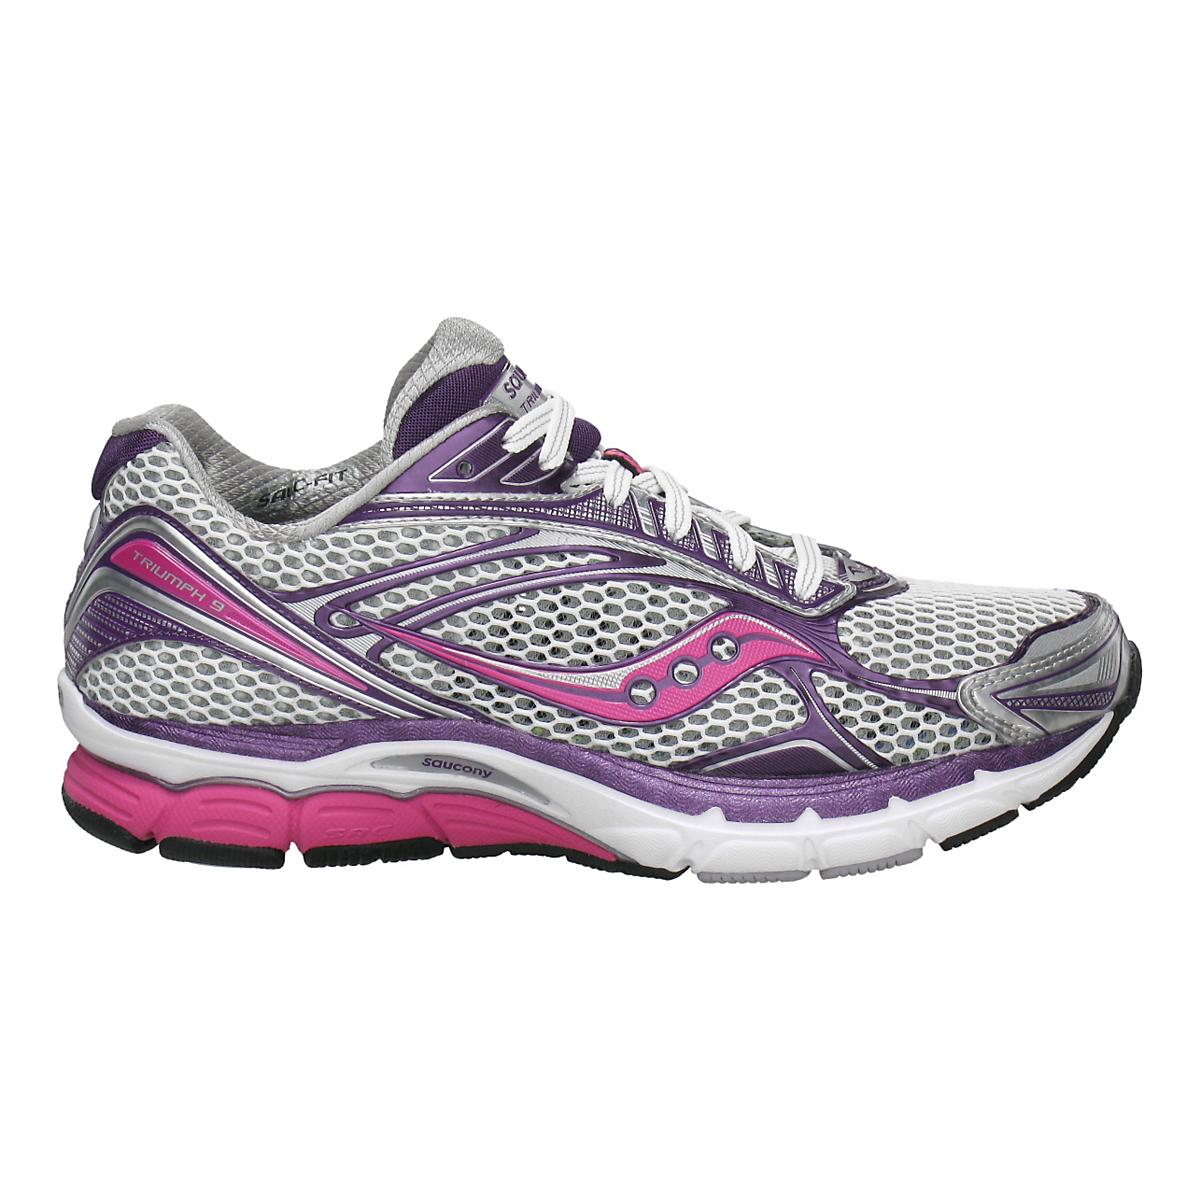 Womens Saucony PowerGrid Triumph 9 Running Shoe at Road Runner Sports